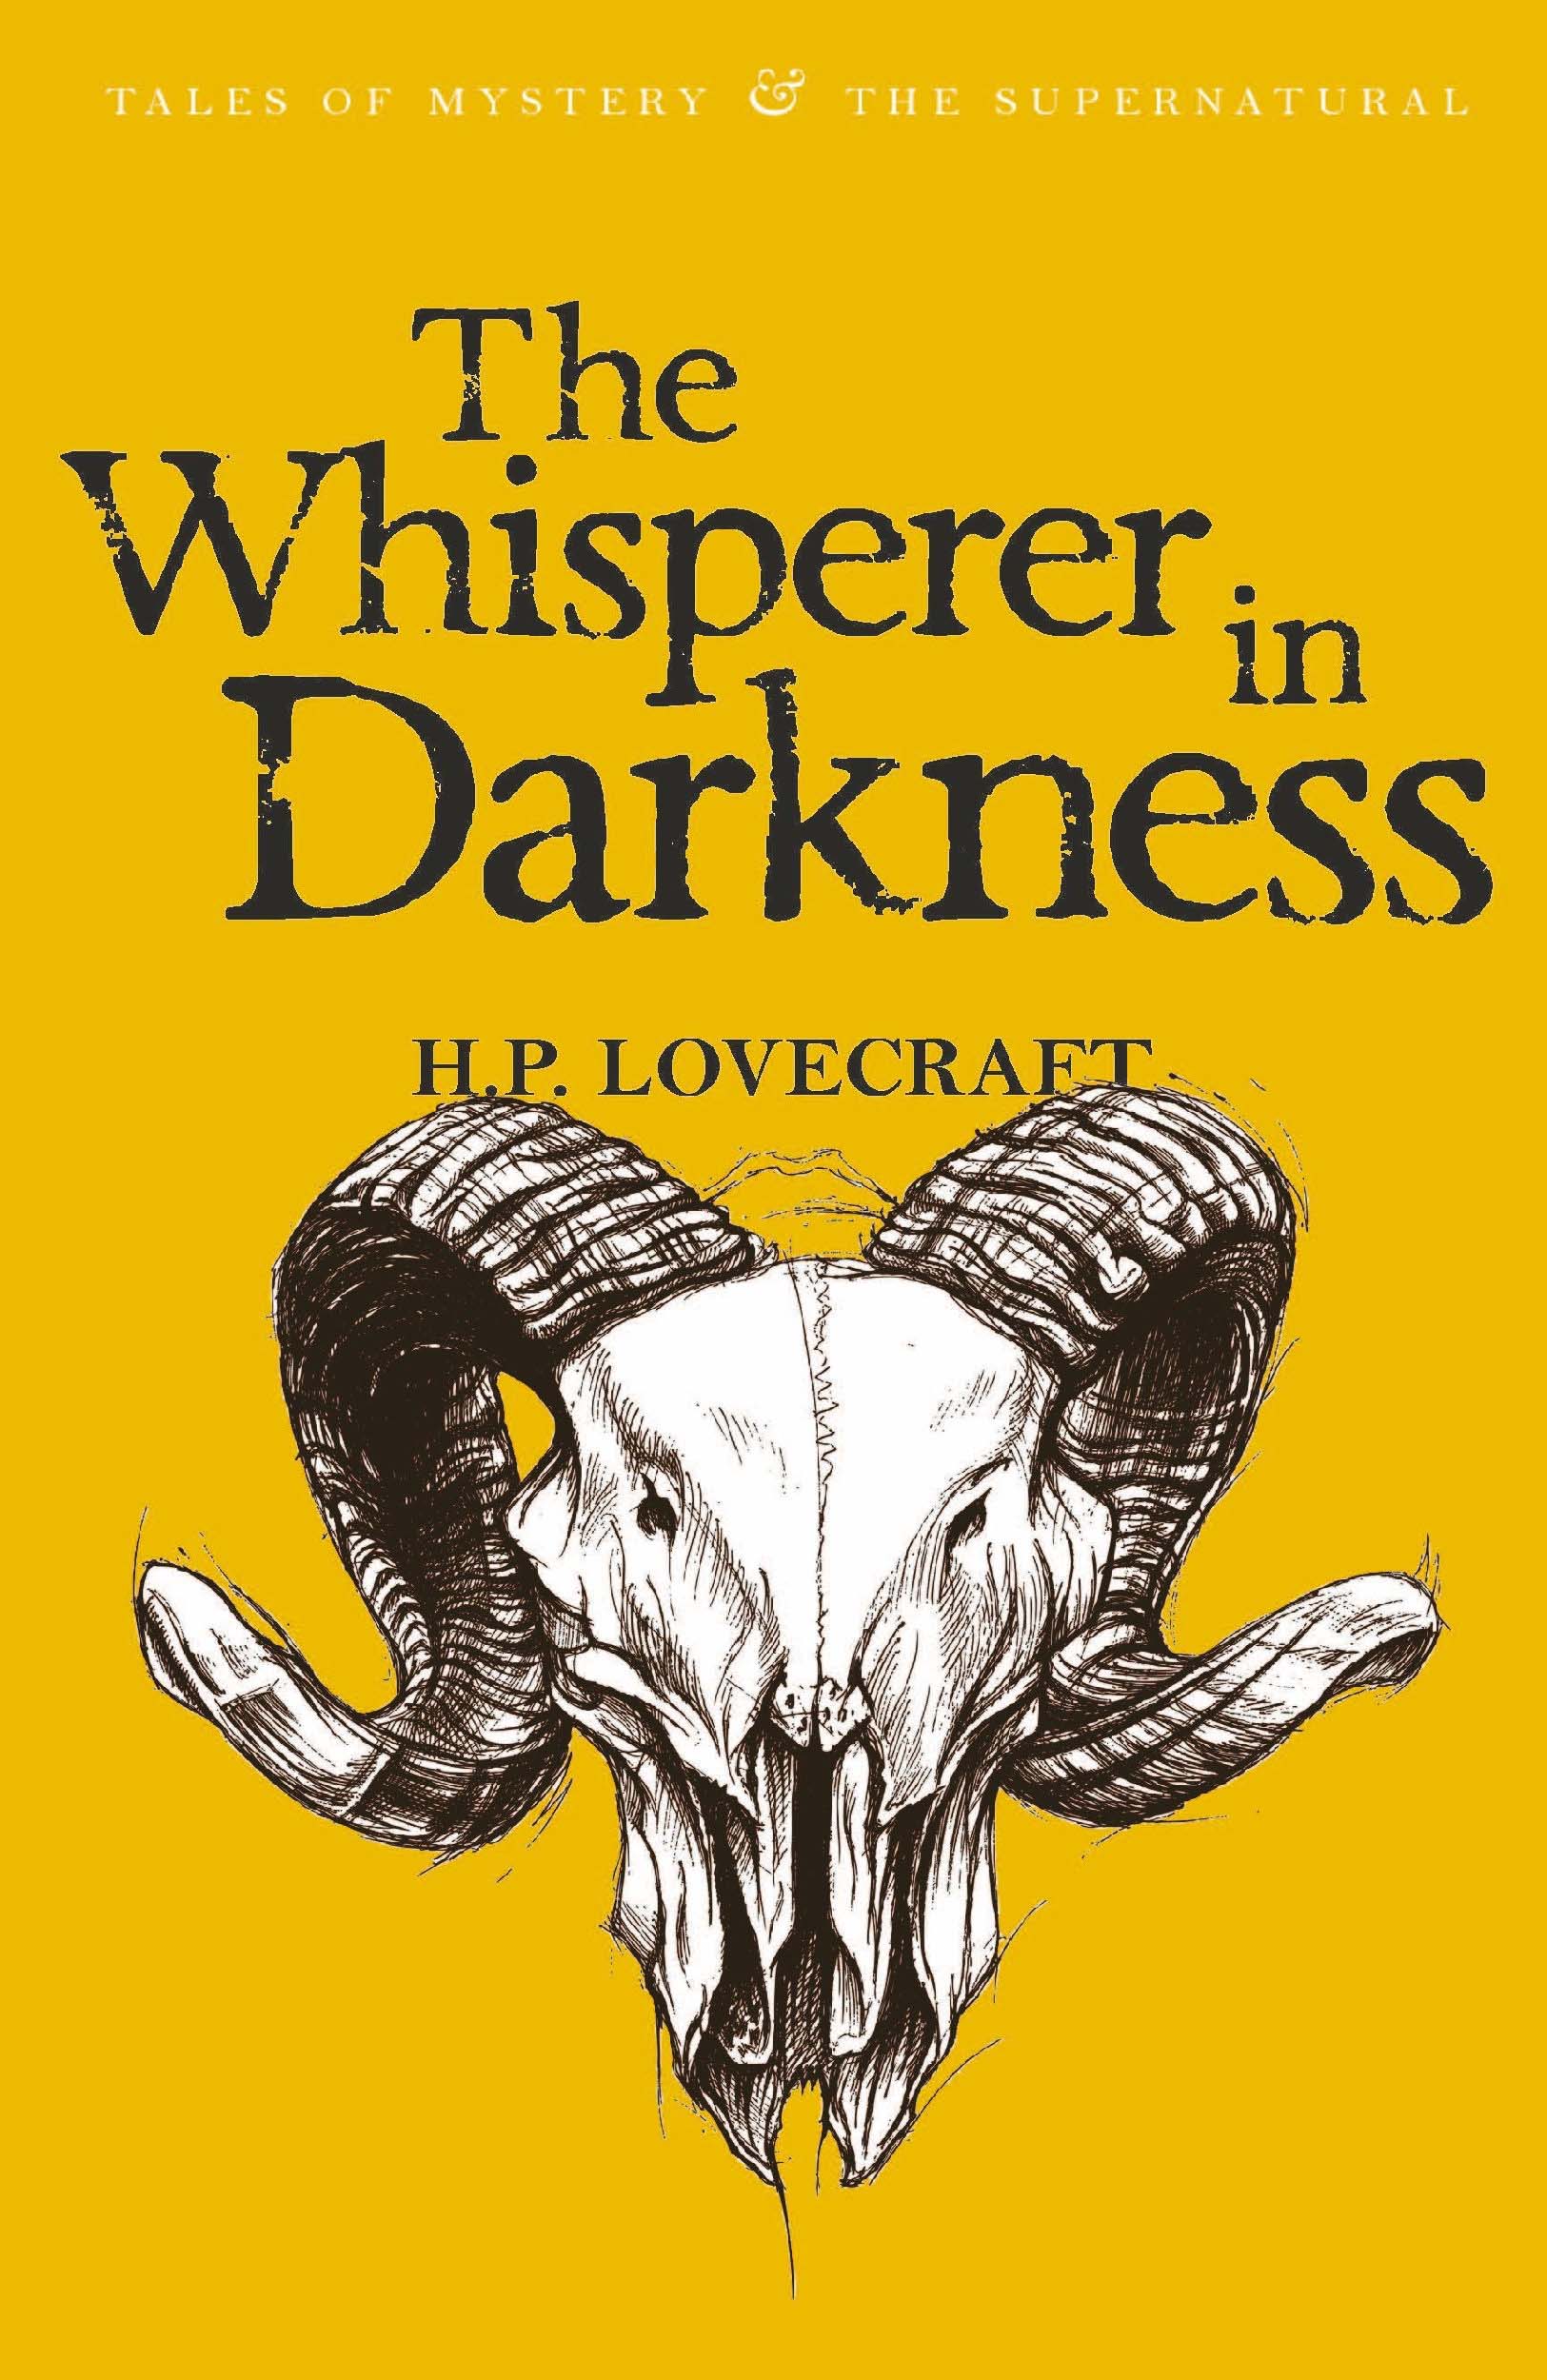 Whisperer in Darkness: Collected Stories Volume I